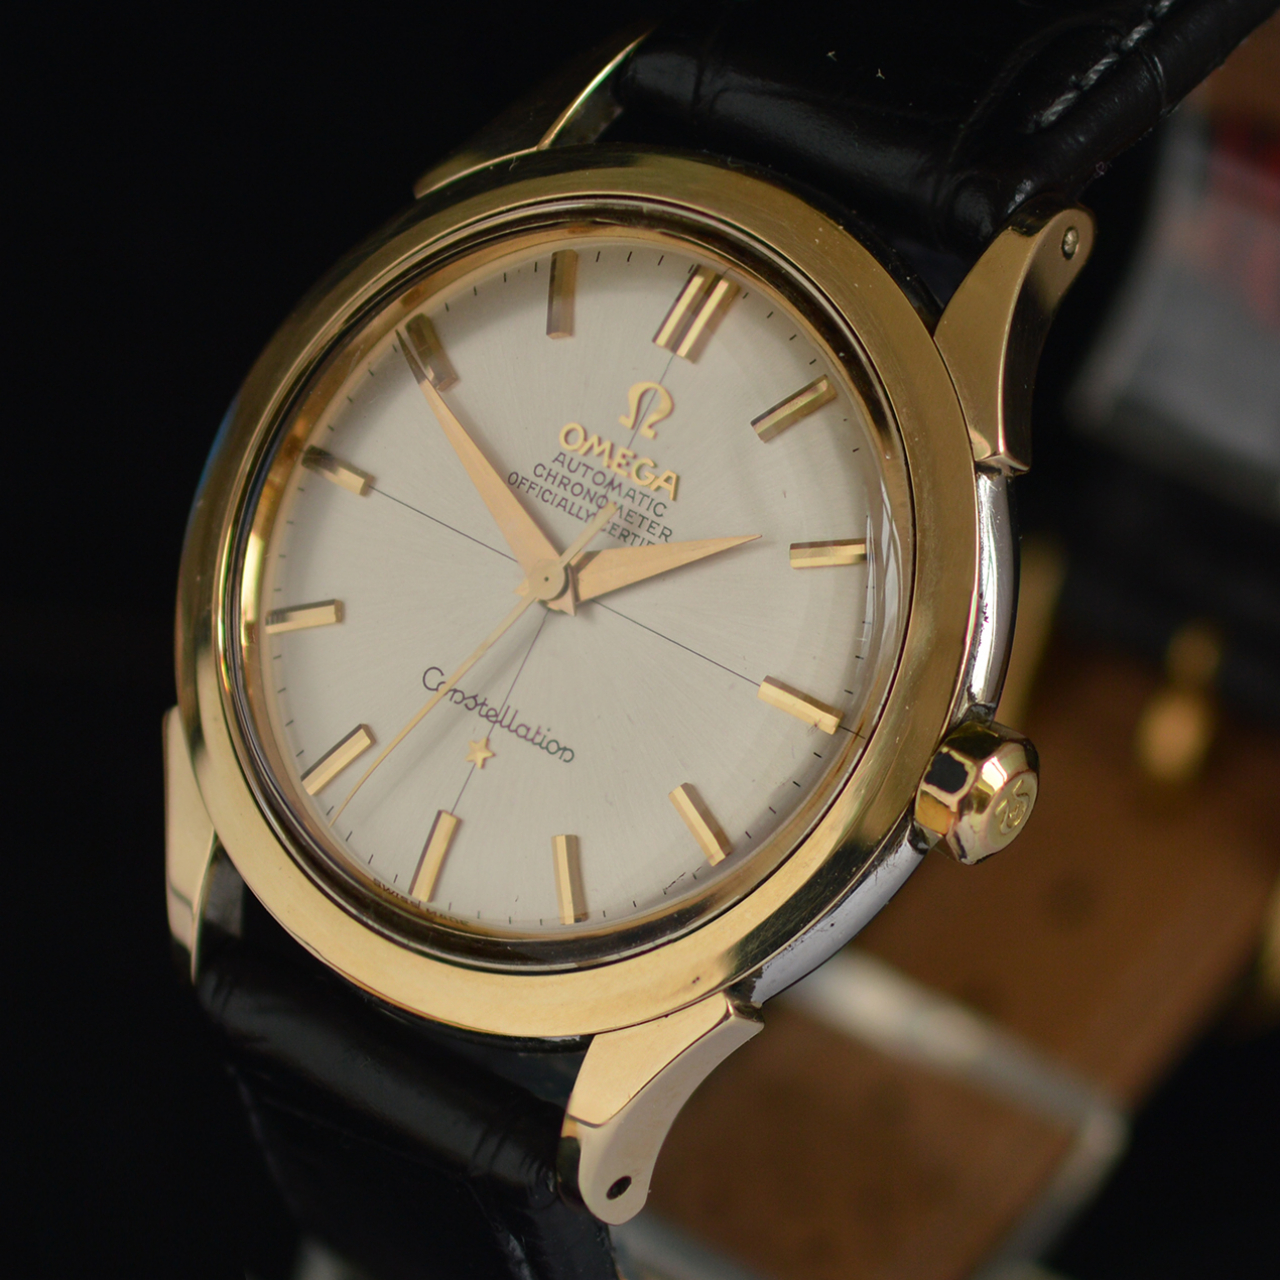 omega constellation steel and gold